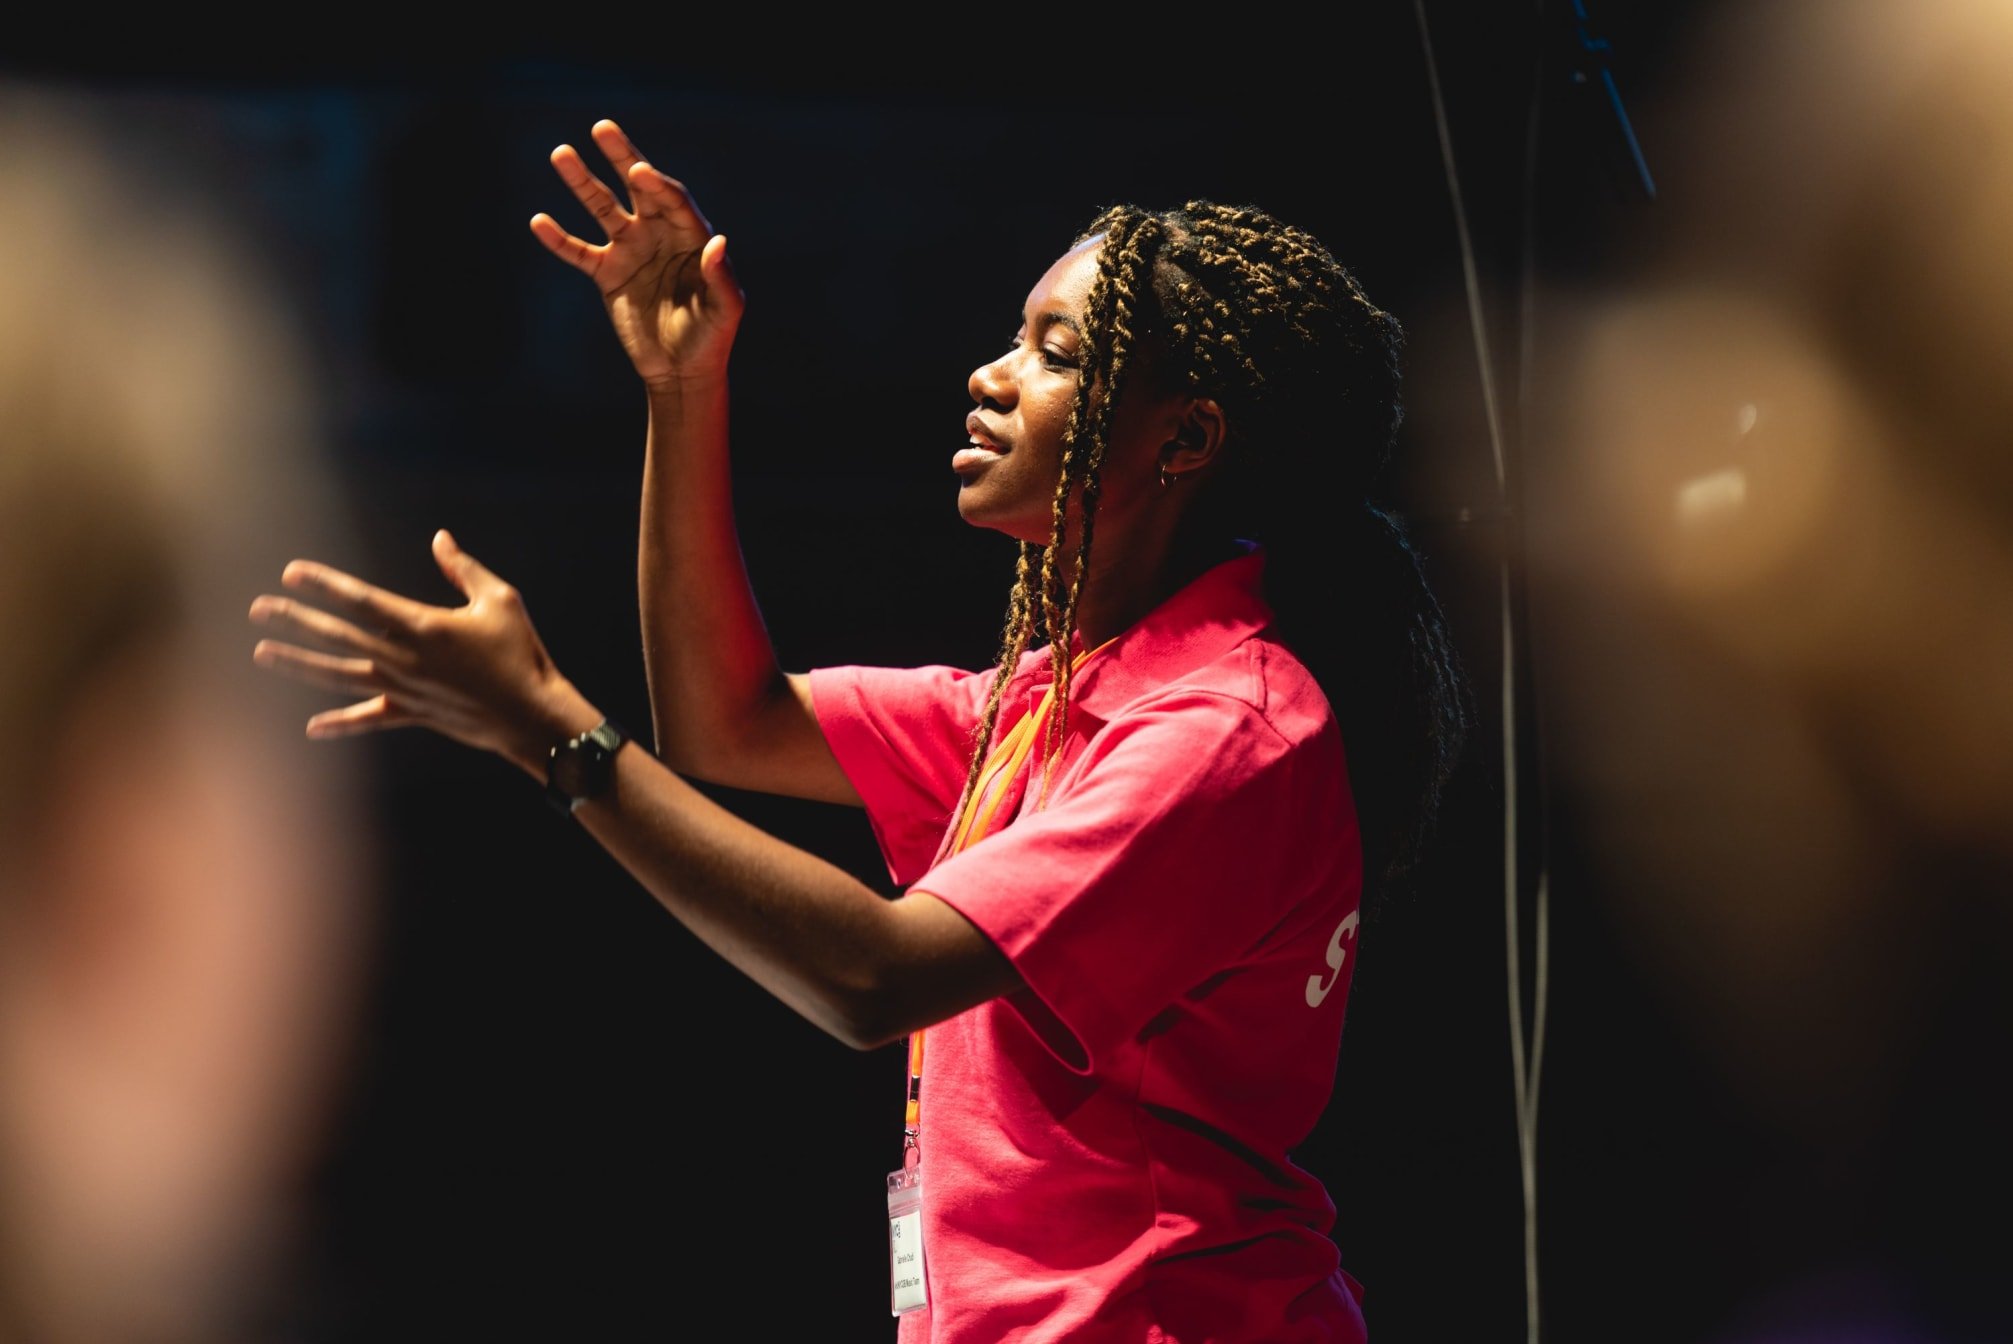 A black woman with long braids wearing a pink polo shirt conducts with her arms poised in midair